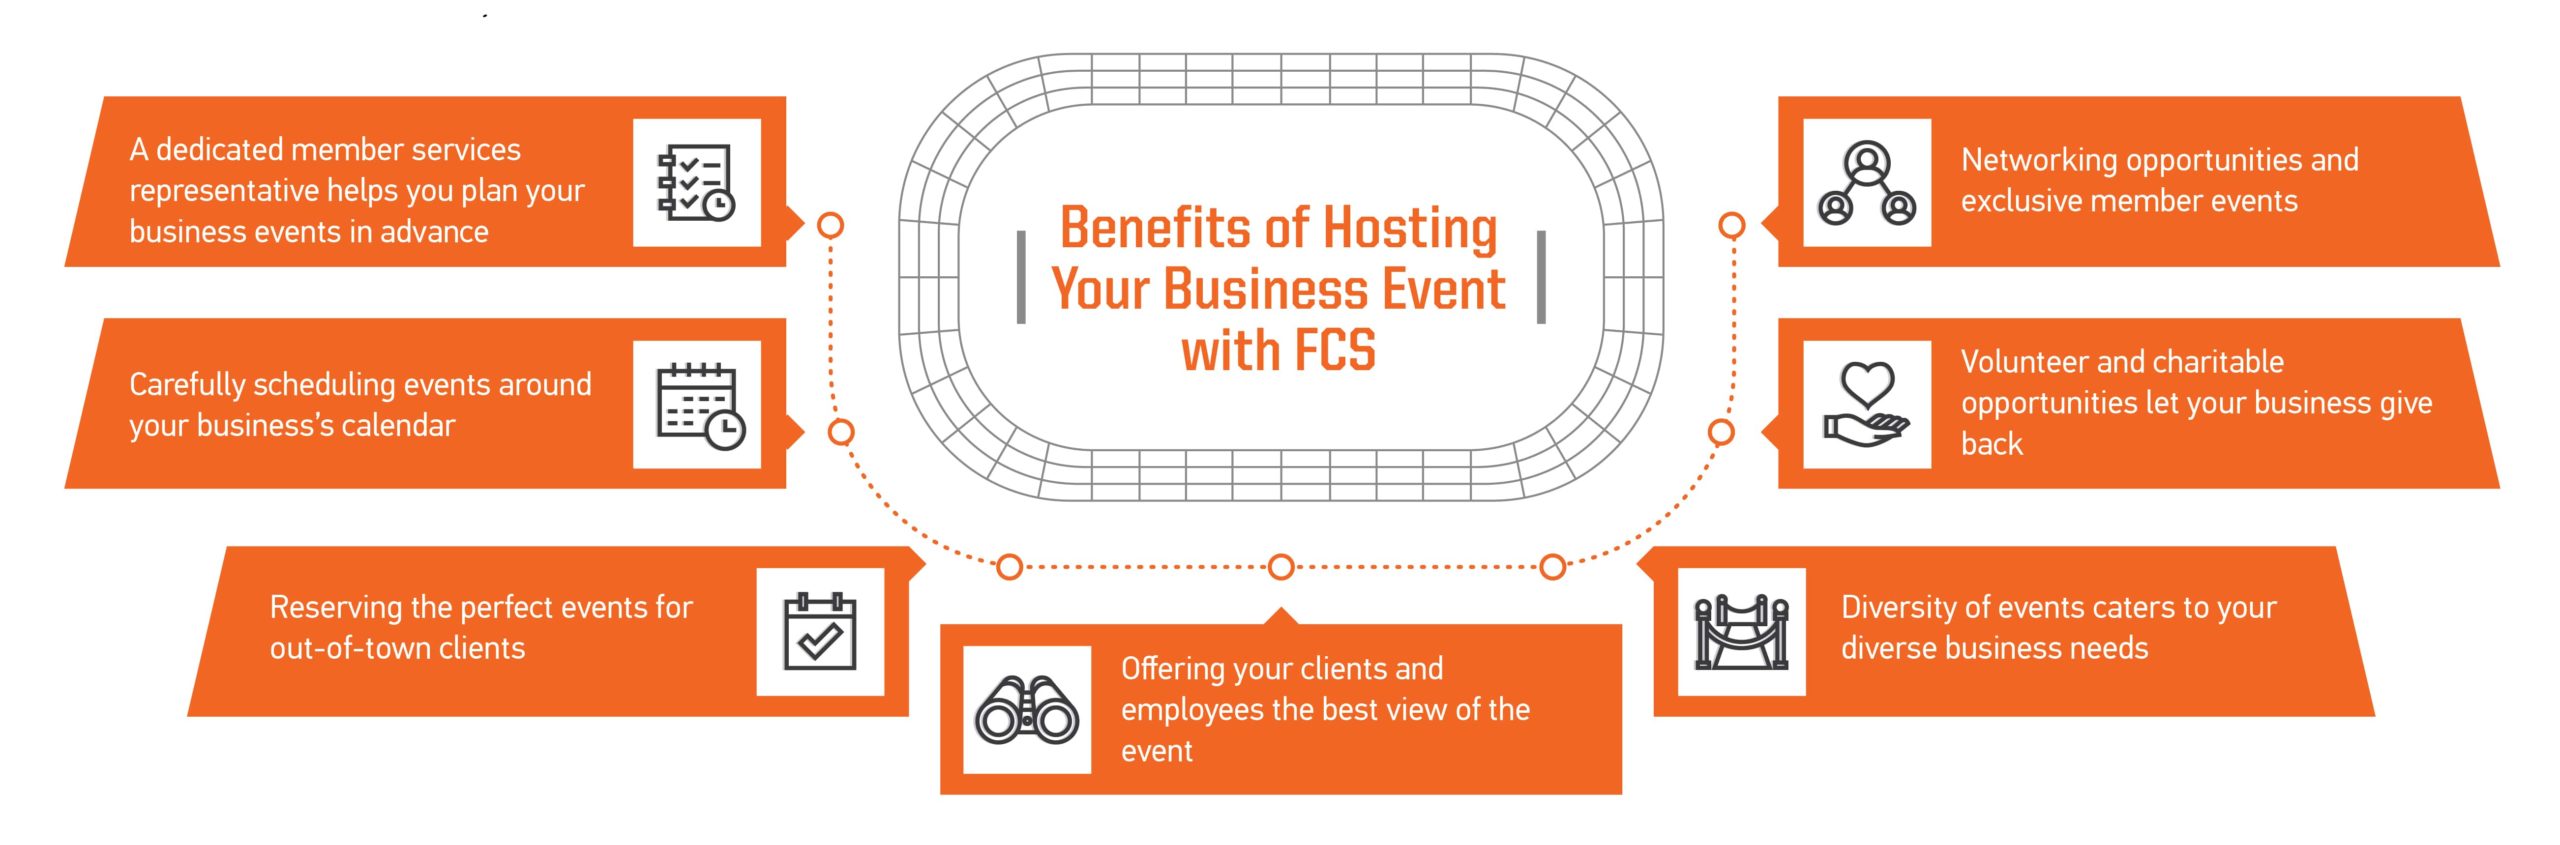 Benefits of business events at Orlando sports venues